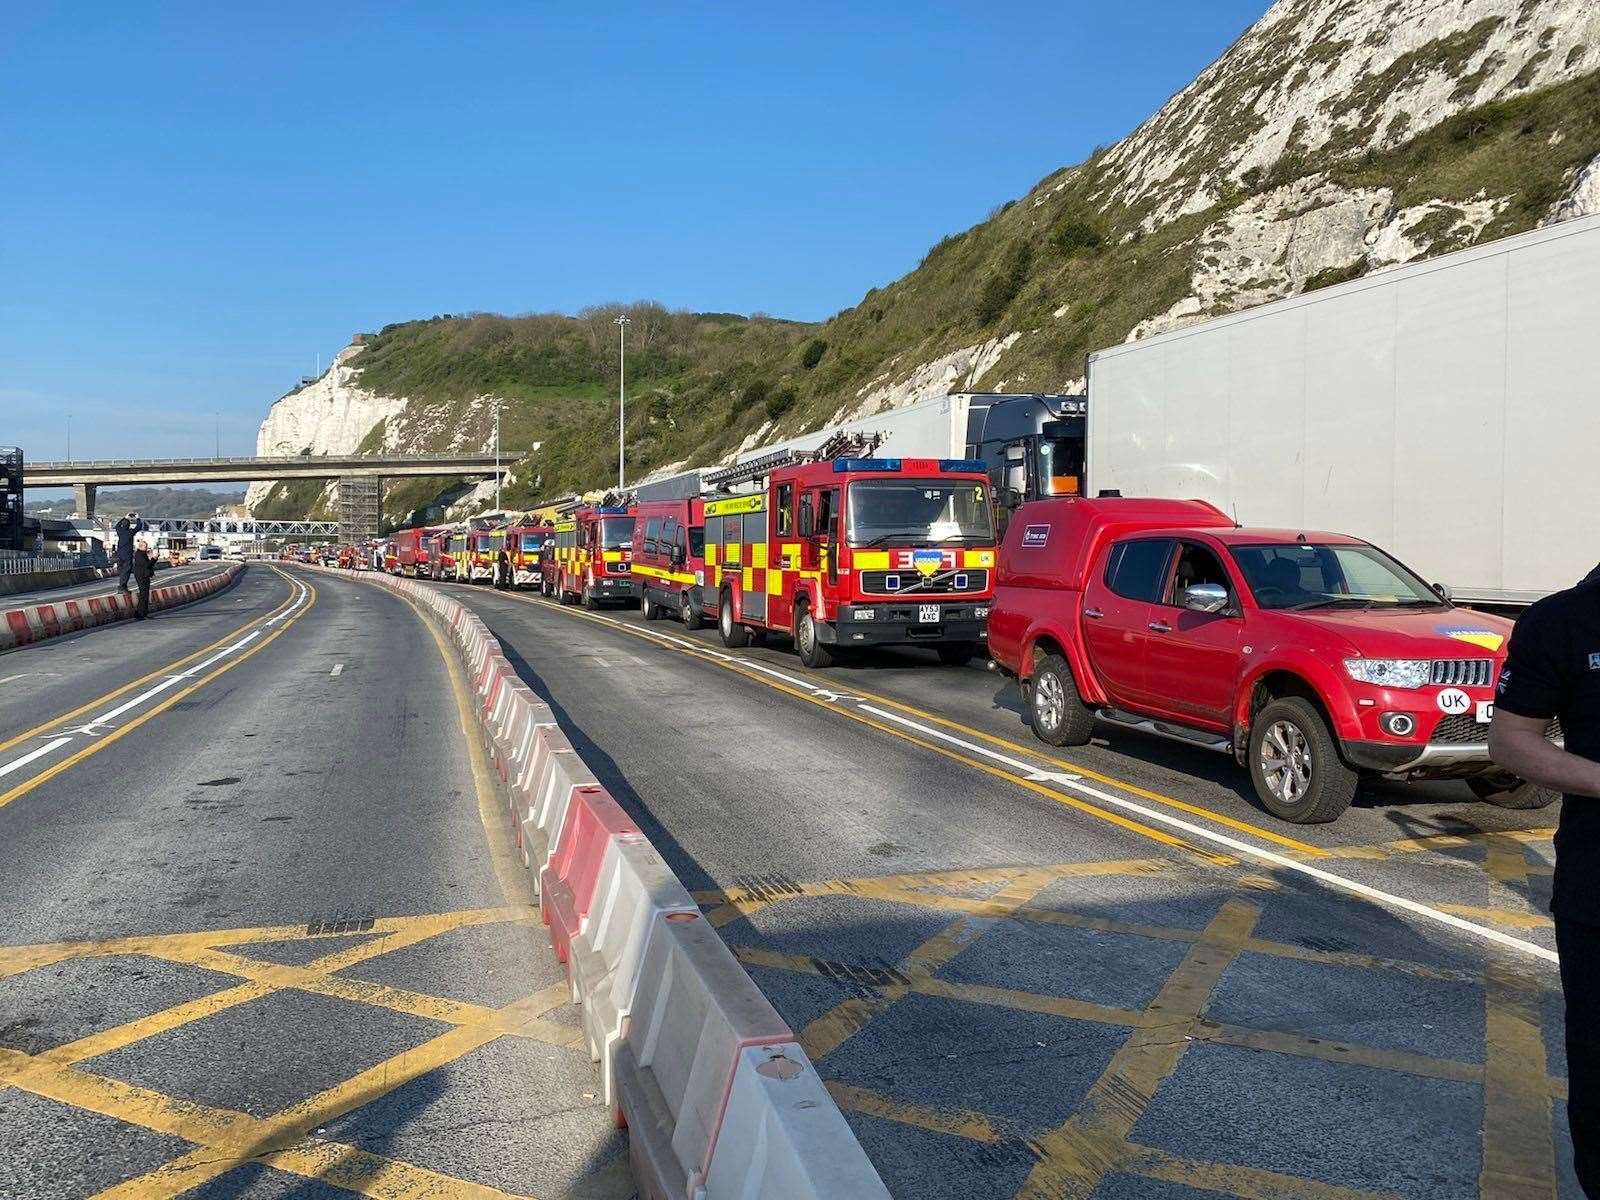 The convoy at the port of Dover ready to cross the channel. Photo: NFCC